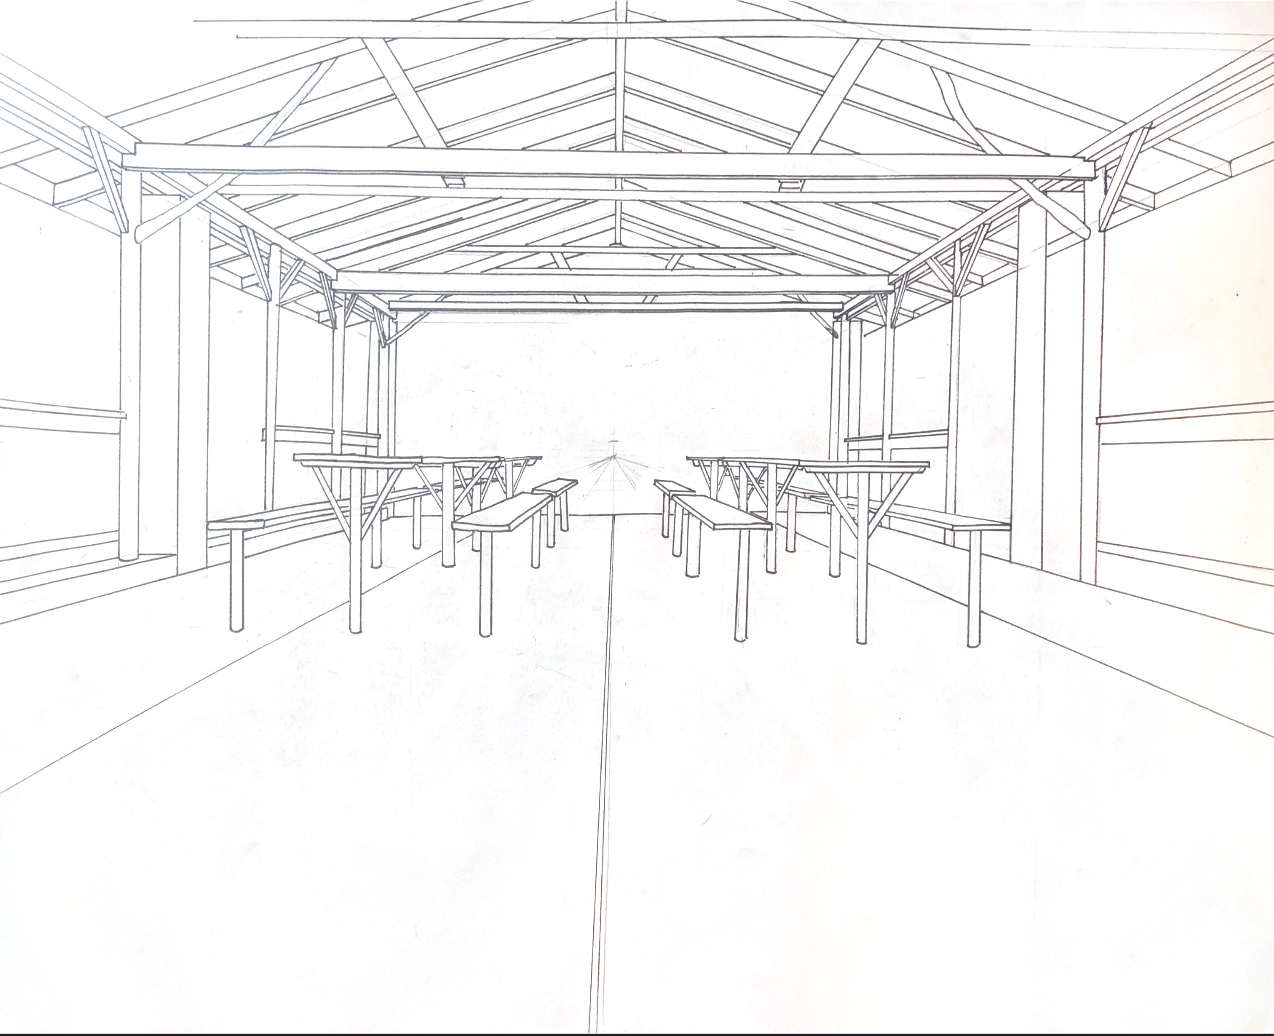 Stephen’s 1-Point Perspective